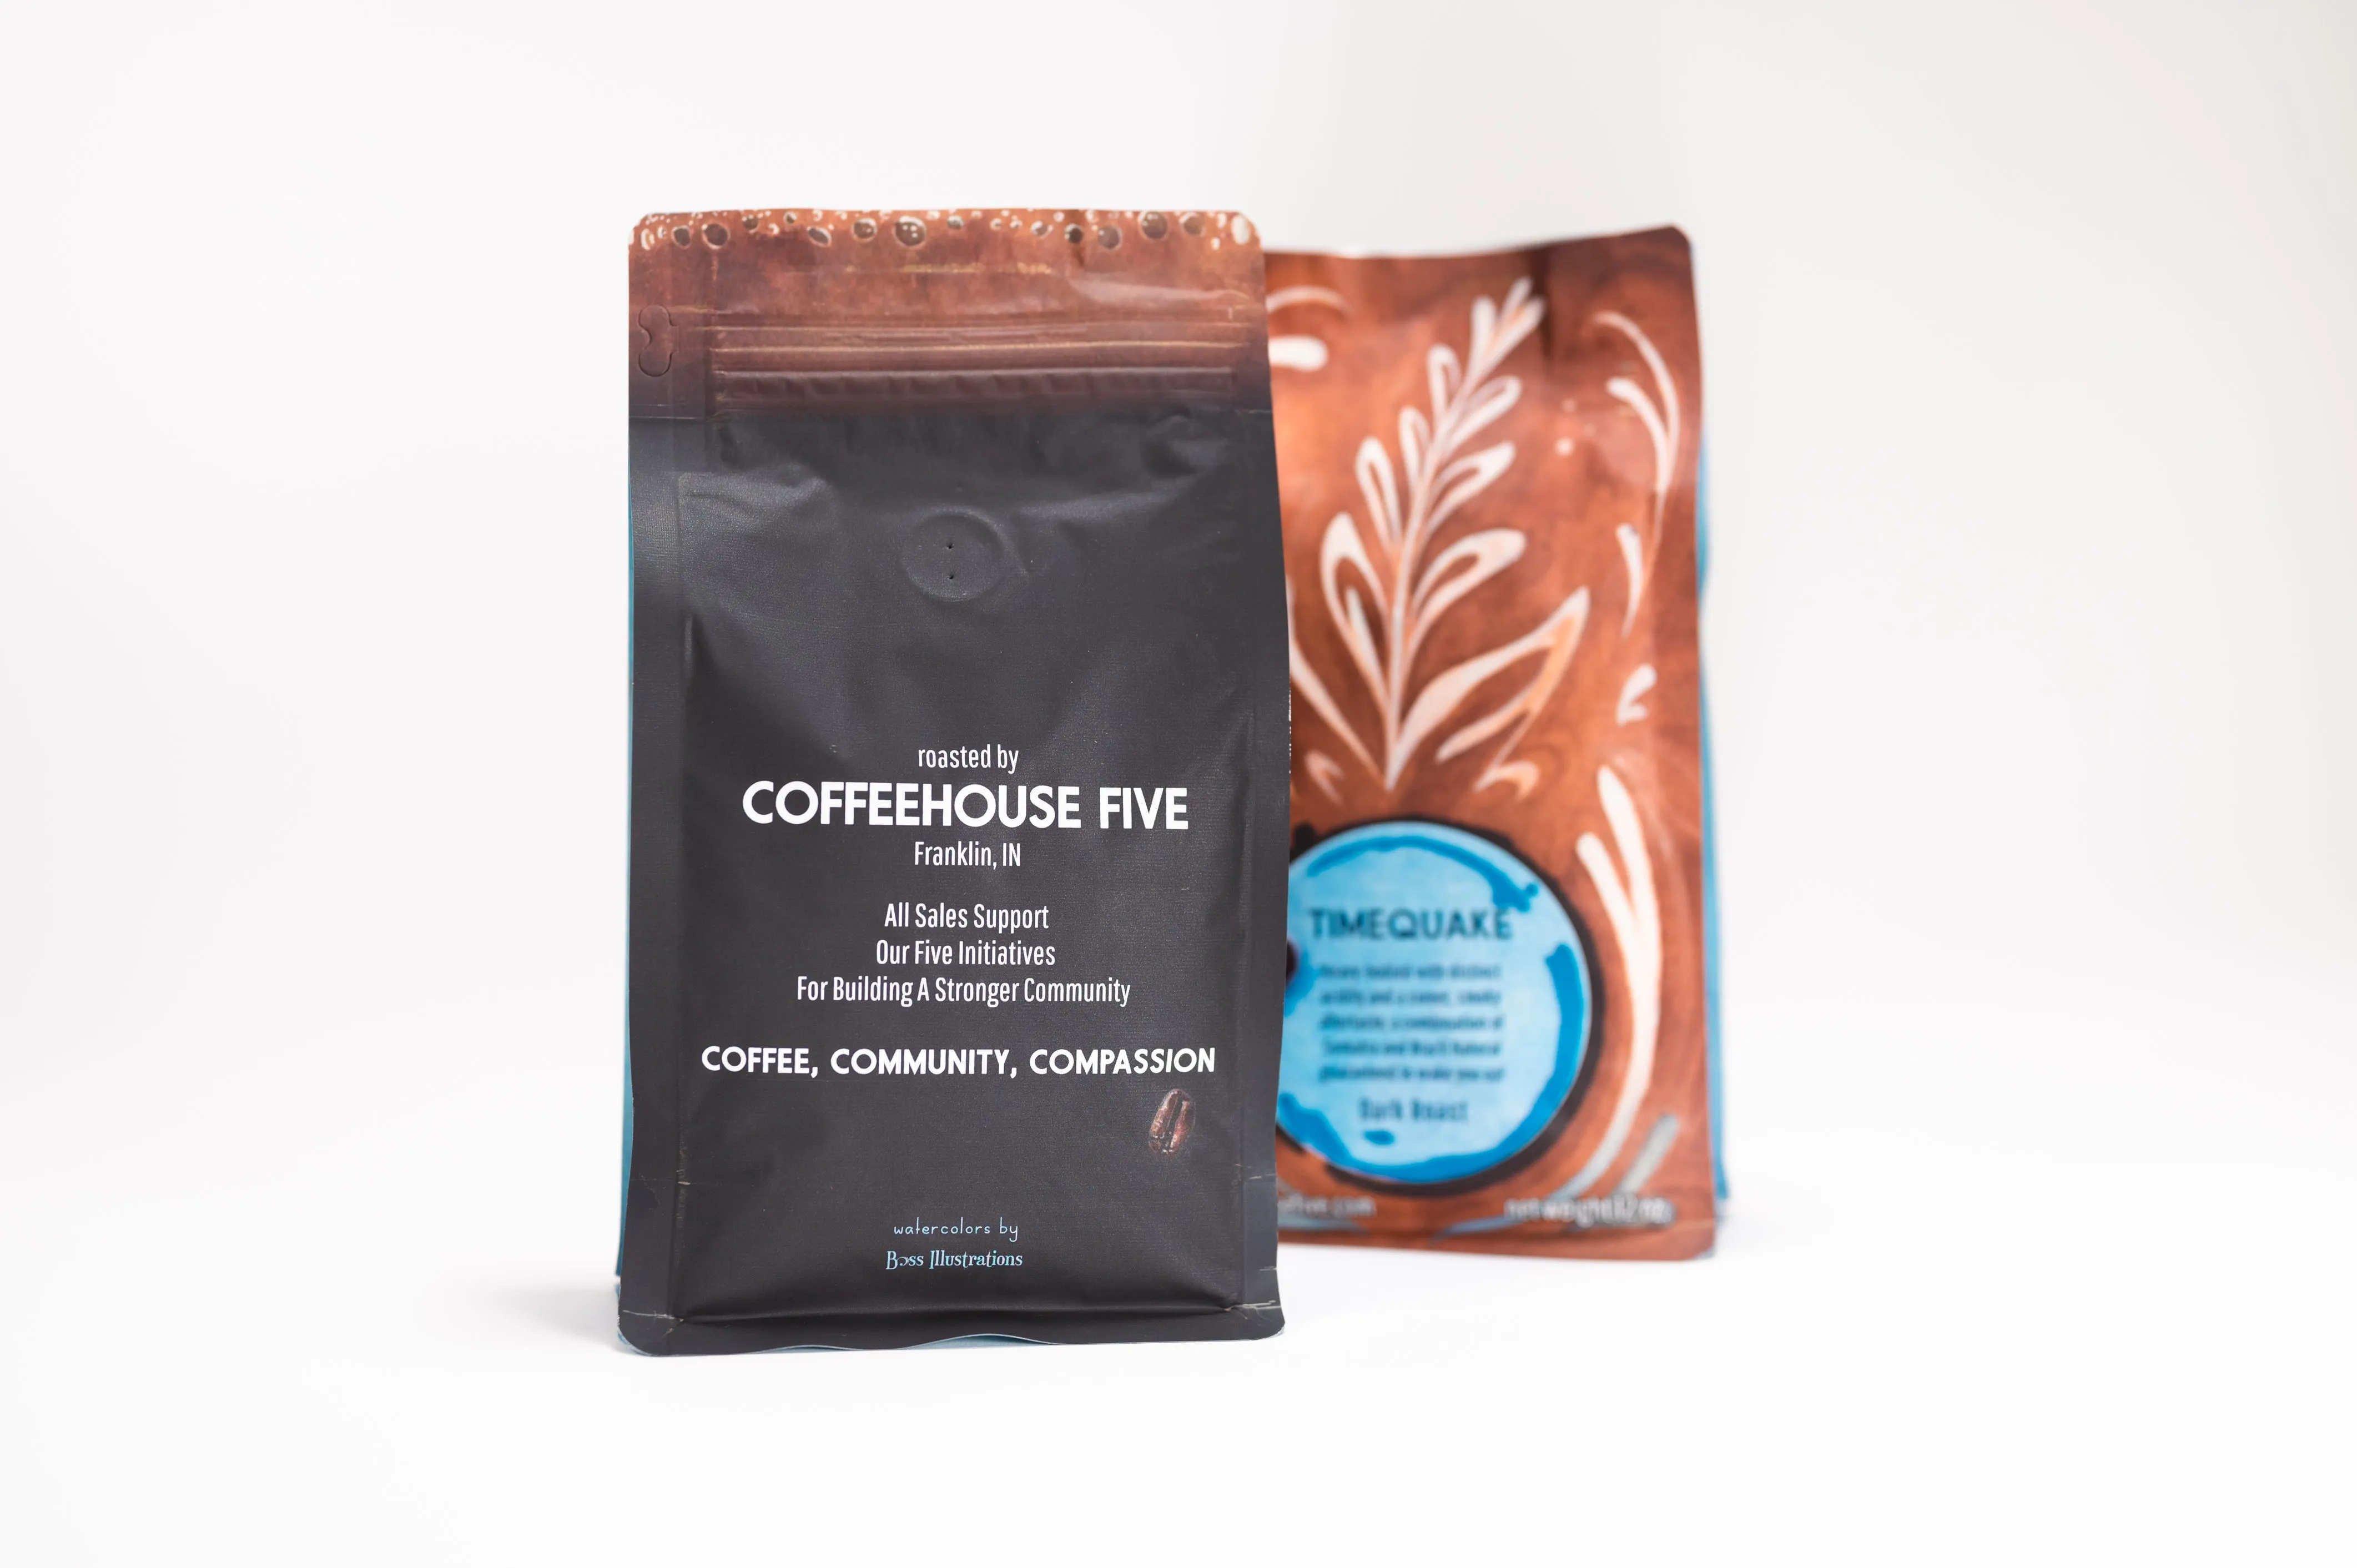 Two bags of coffee branded "COFFEEHOUSE FIVE" and "TIMEQUAKE" against a white background.